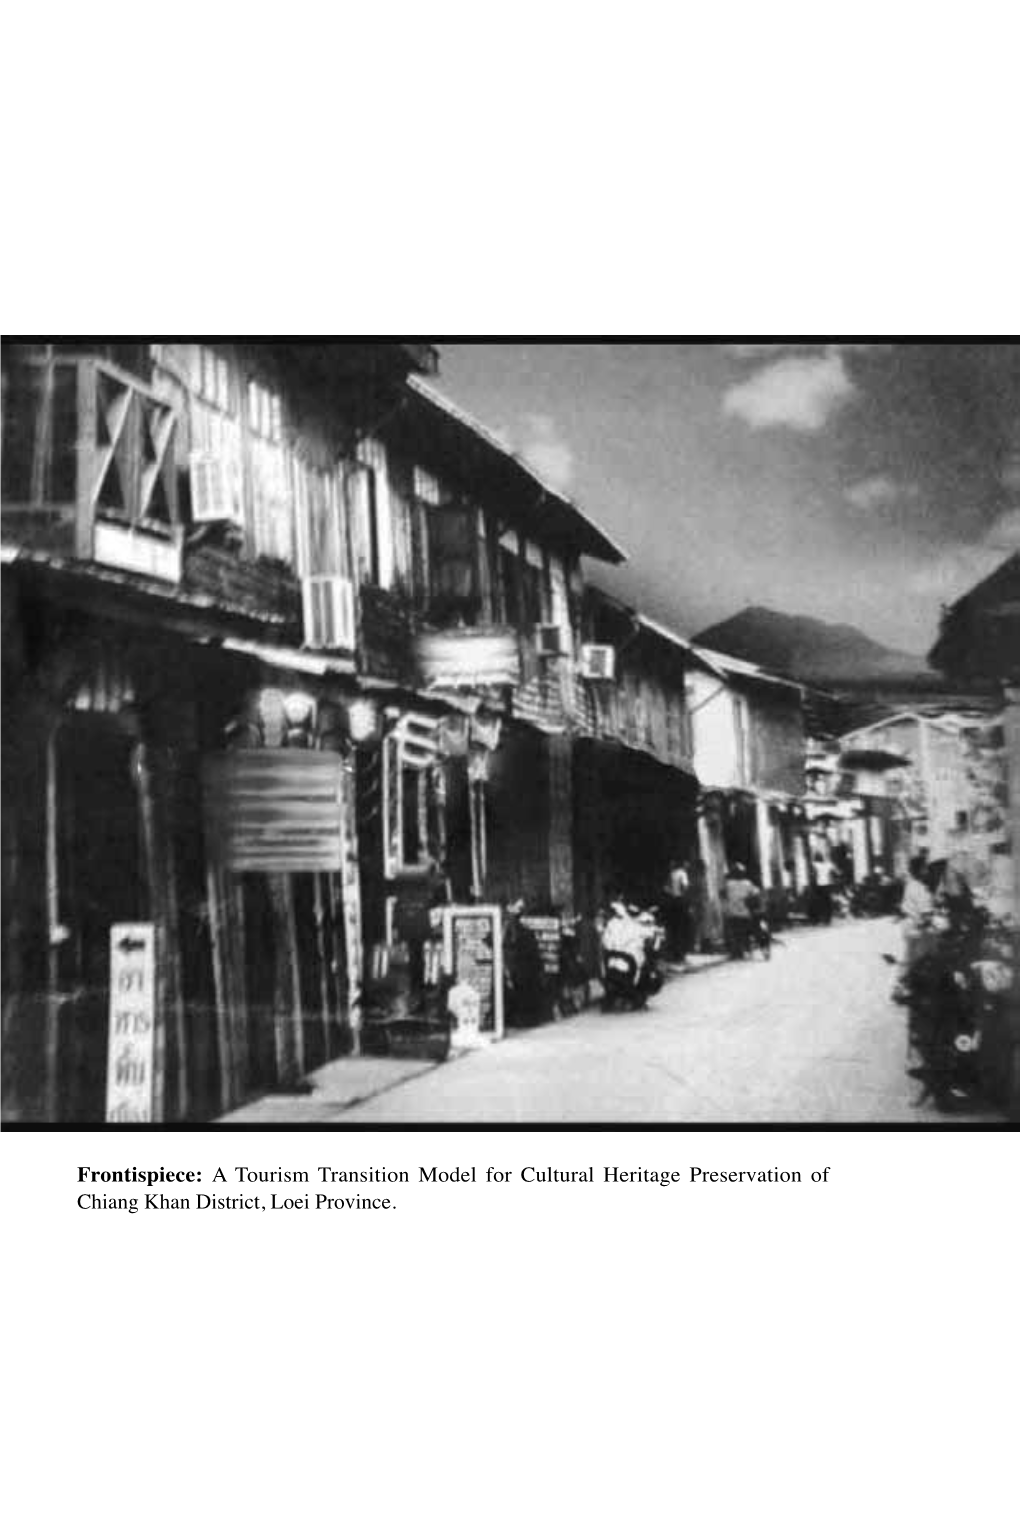 A Tourism Transition Model for Cultural Heritage Preservation of Chiang Khan District, Loei Province